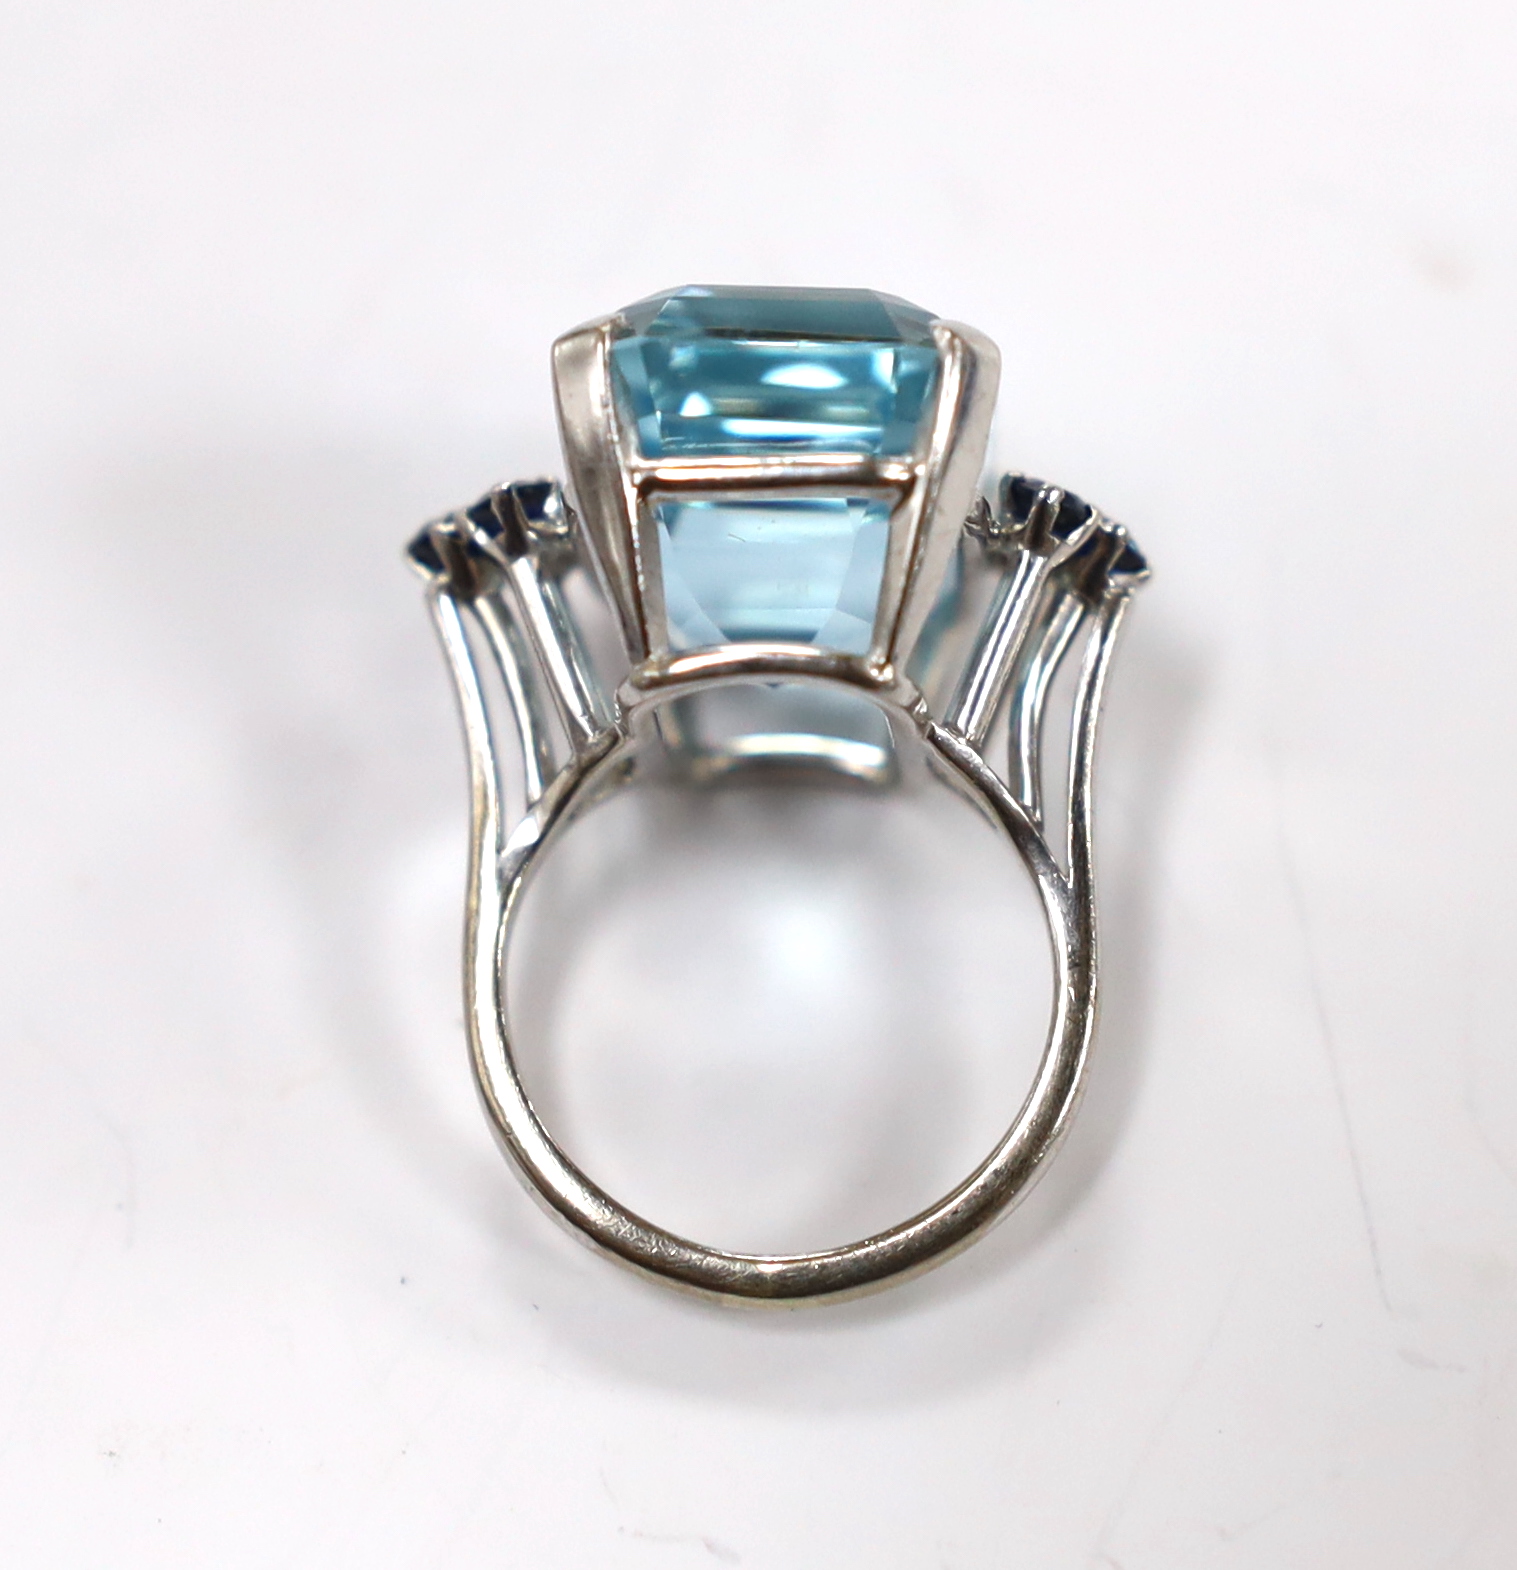 An 18ct white metal and single stone emerald cut aquamarines set dress ring, with six stone sapphire set shoulders, size L, gross weight 11.7 grams.